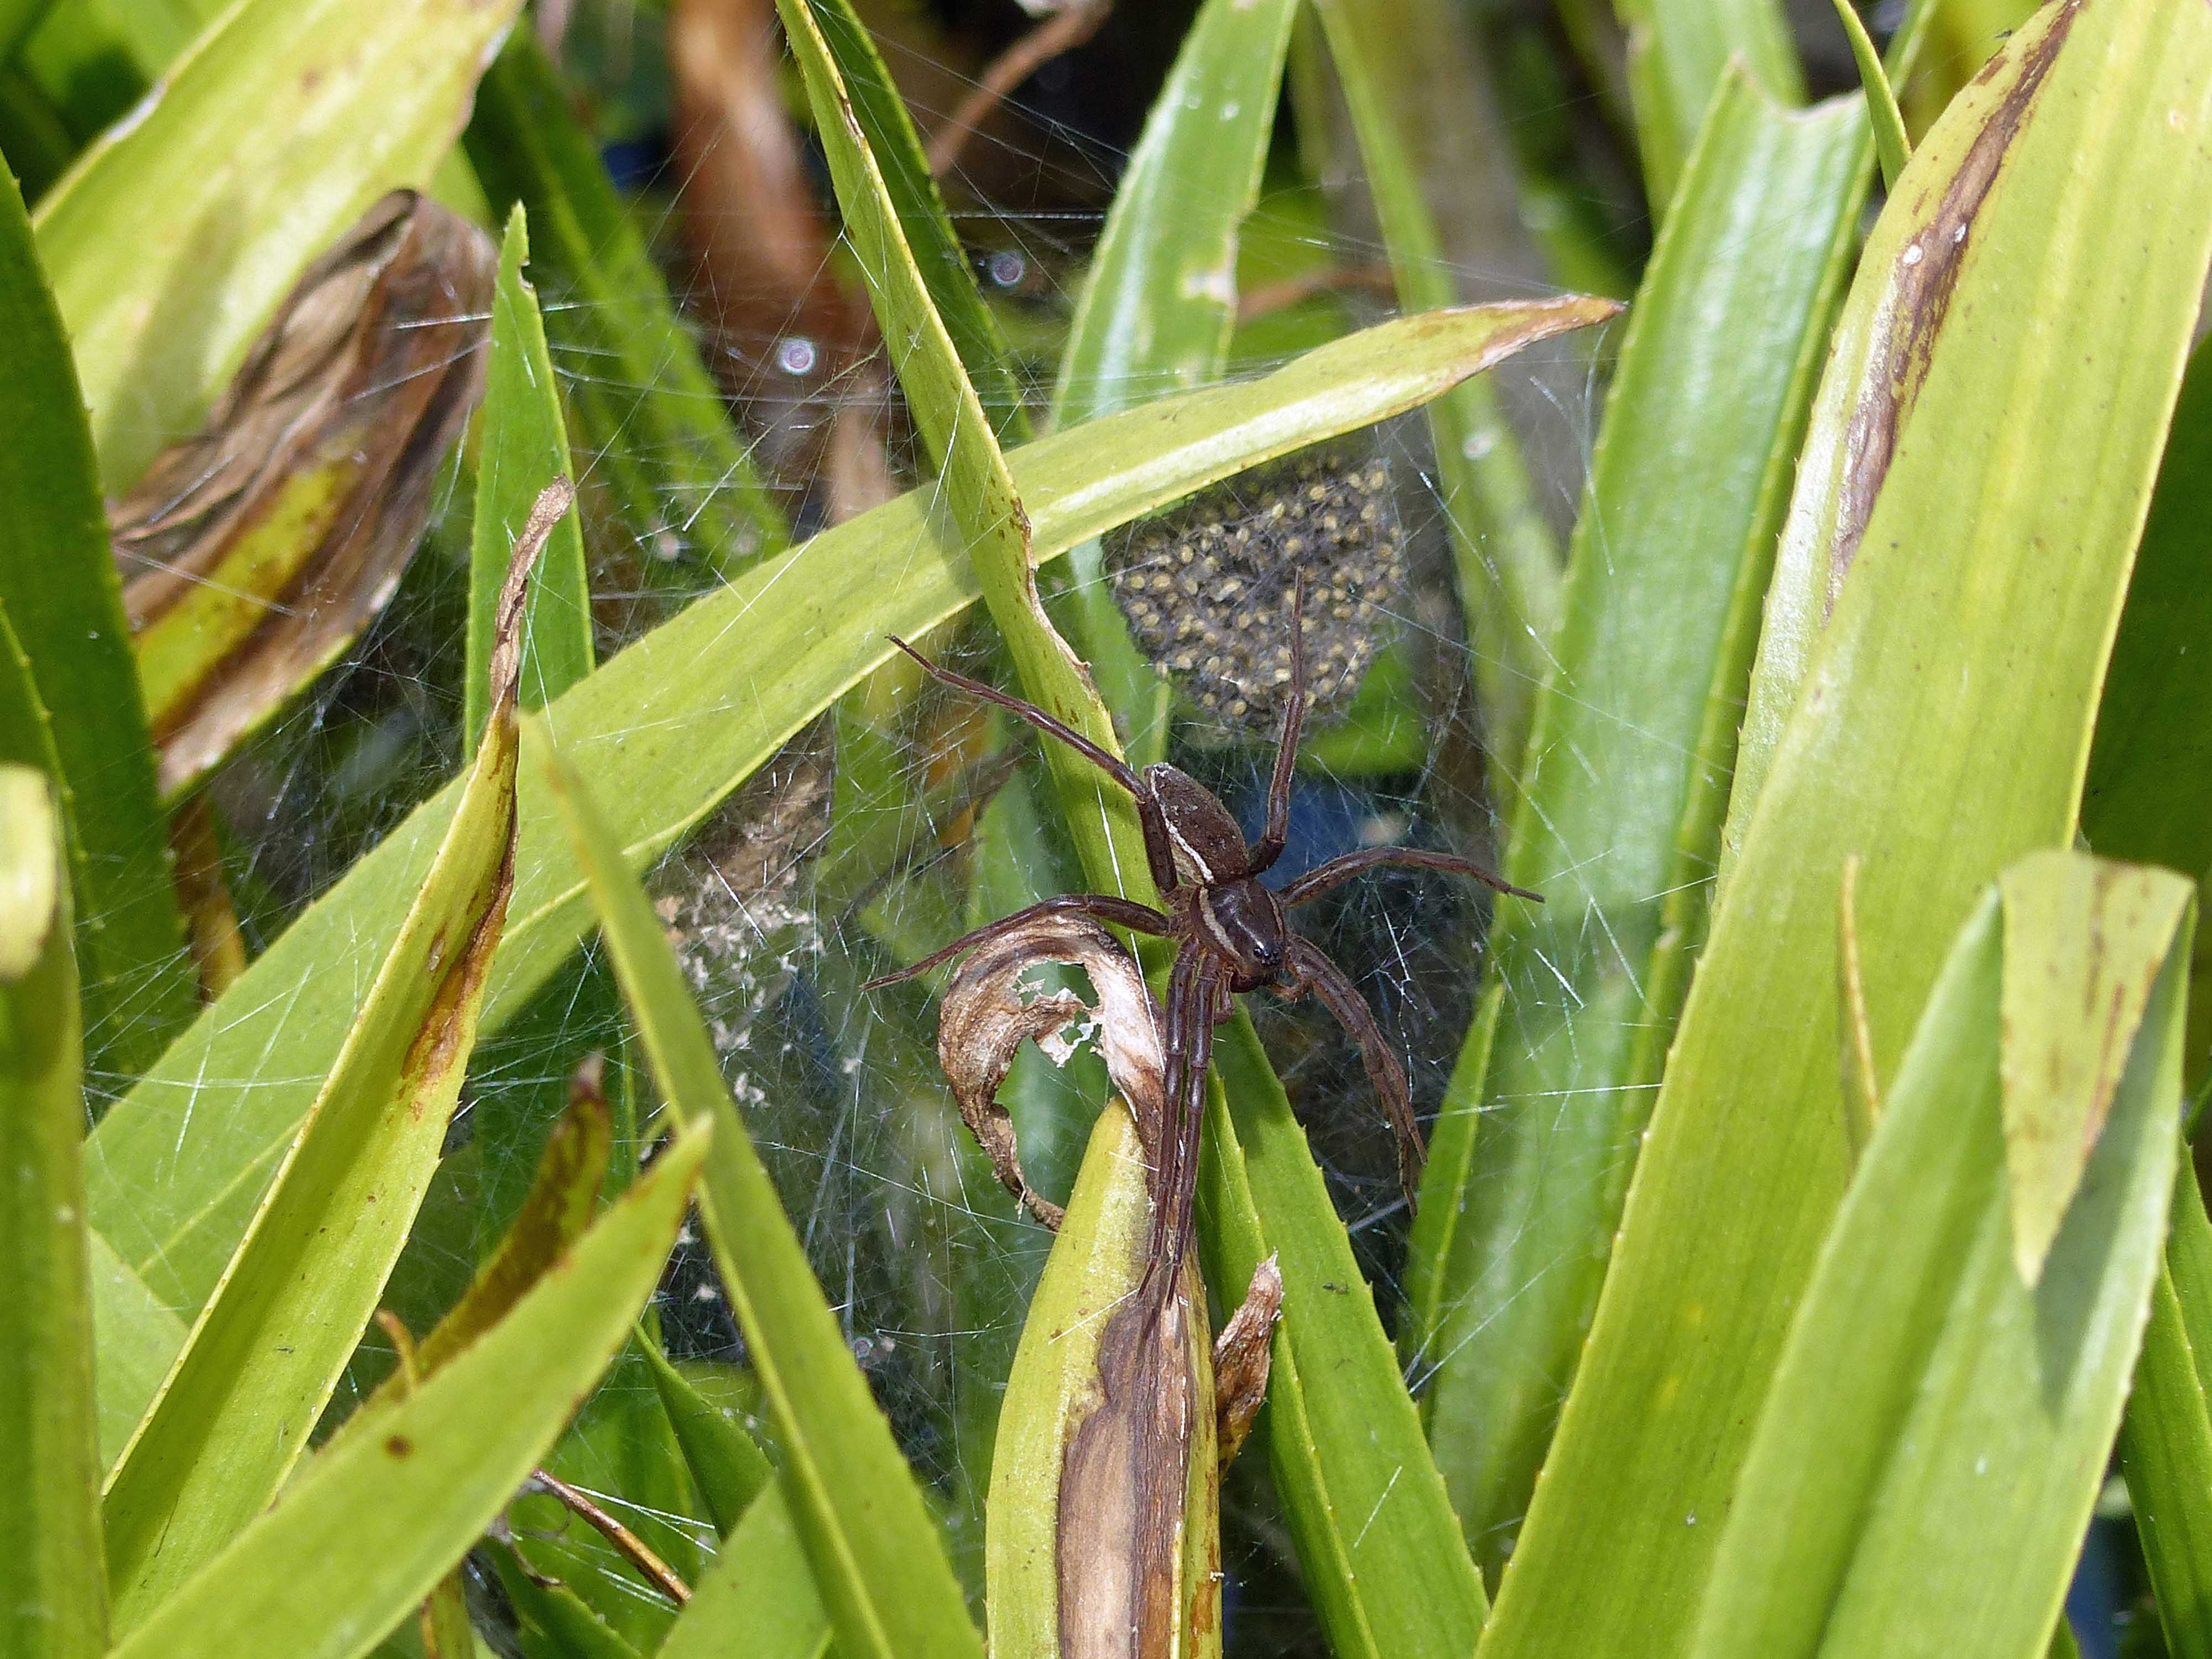 Dolomedes plantarius with female guarding and spiderling ball and remains of eggs sac visible